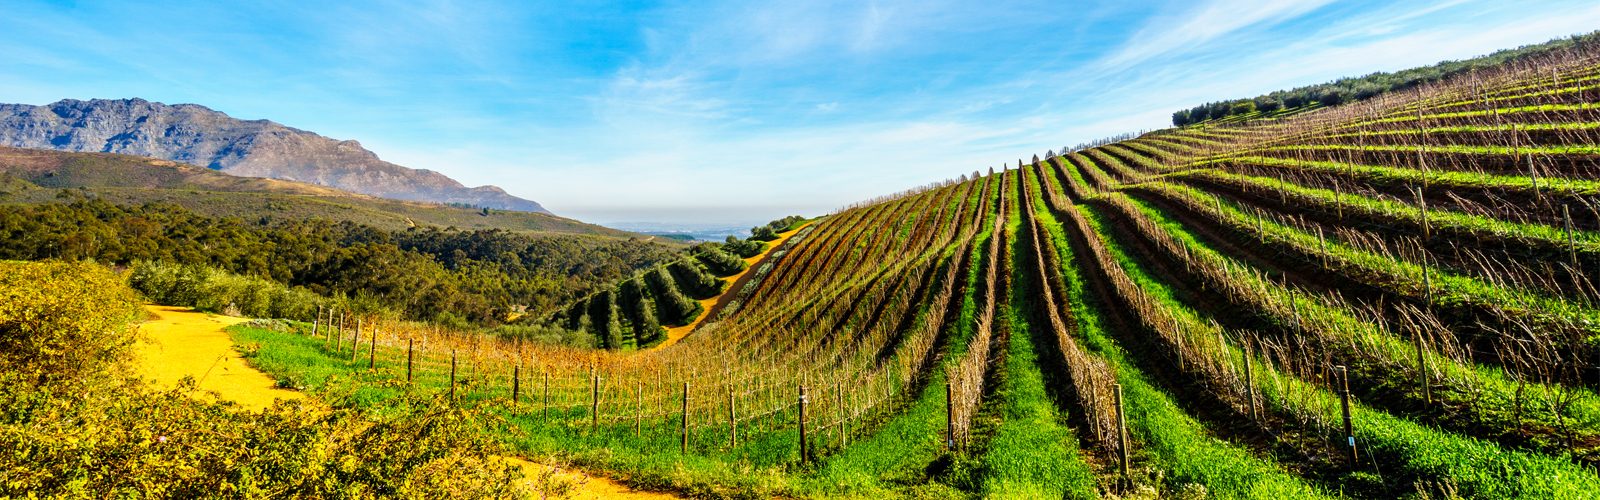 Luxury South Africa Holiday Packages The Ultimate Guide To Wine Tasting In South Africa Header